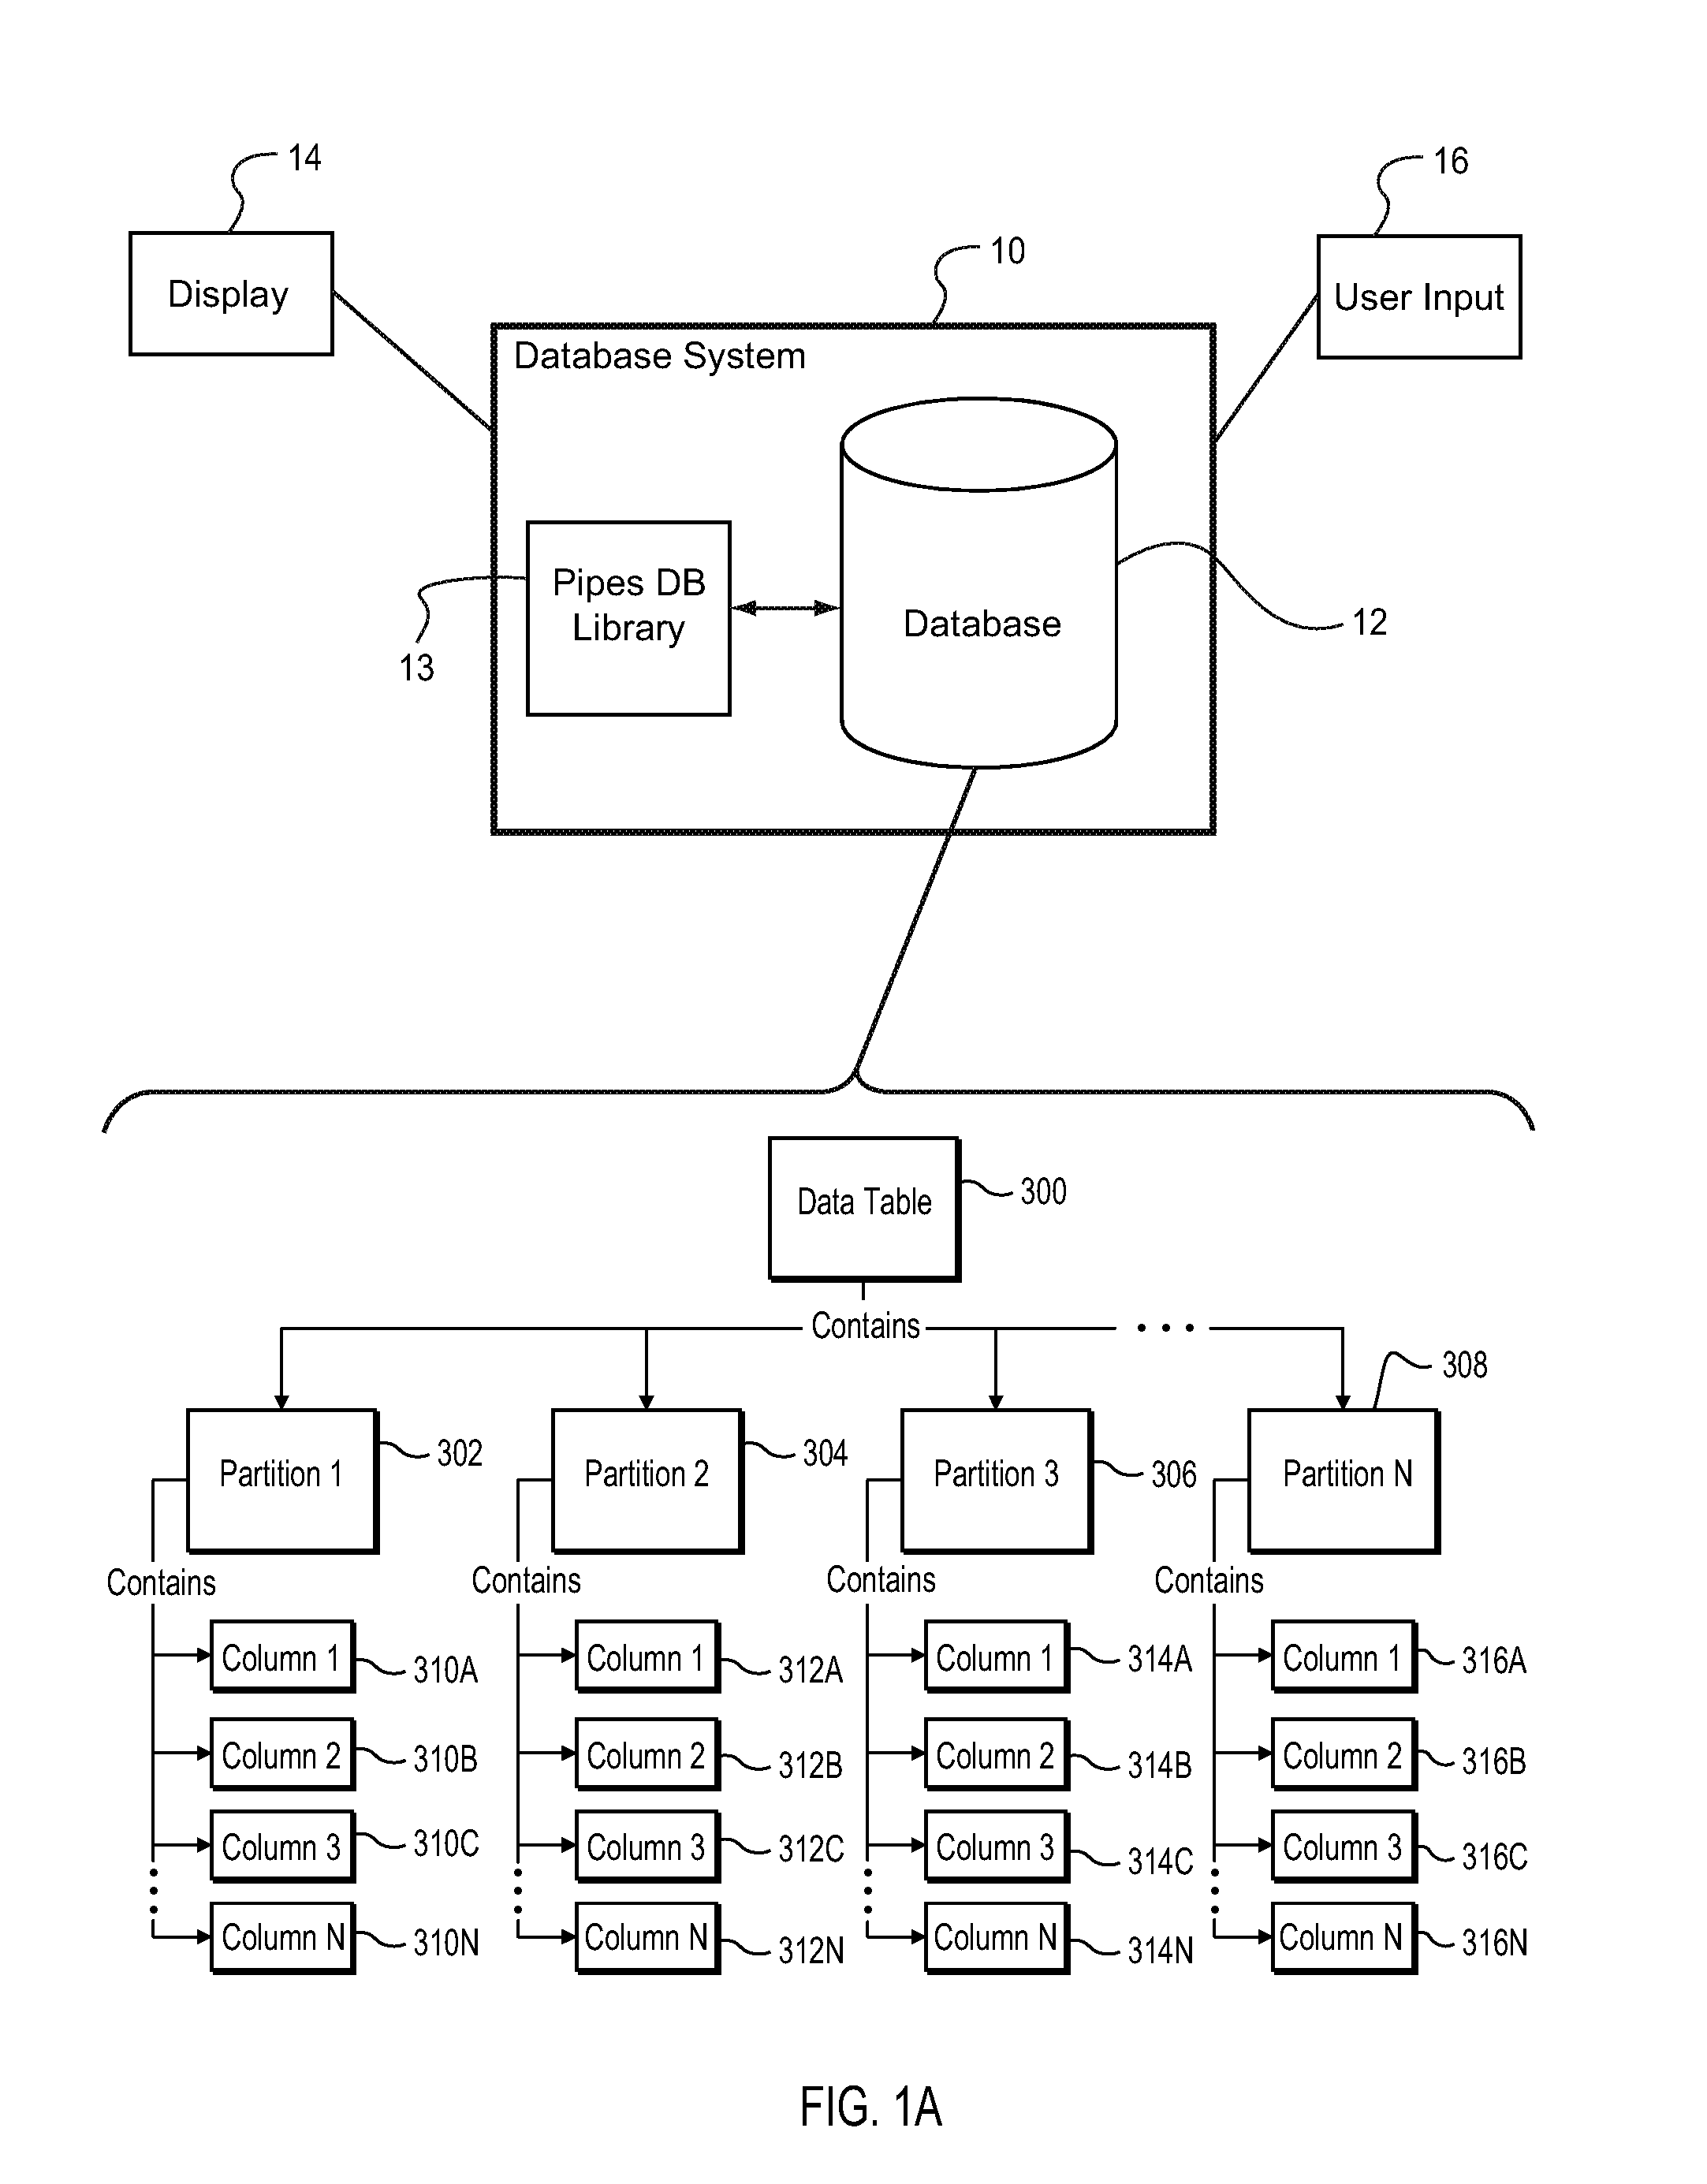 Partitioned database model to increase the scalability of an information system